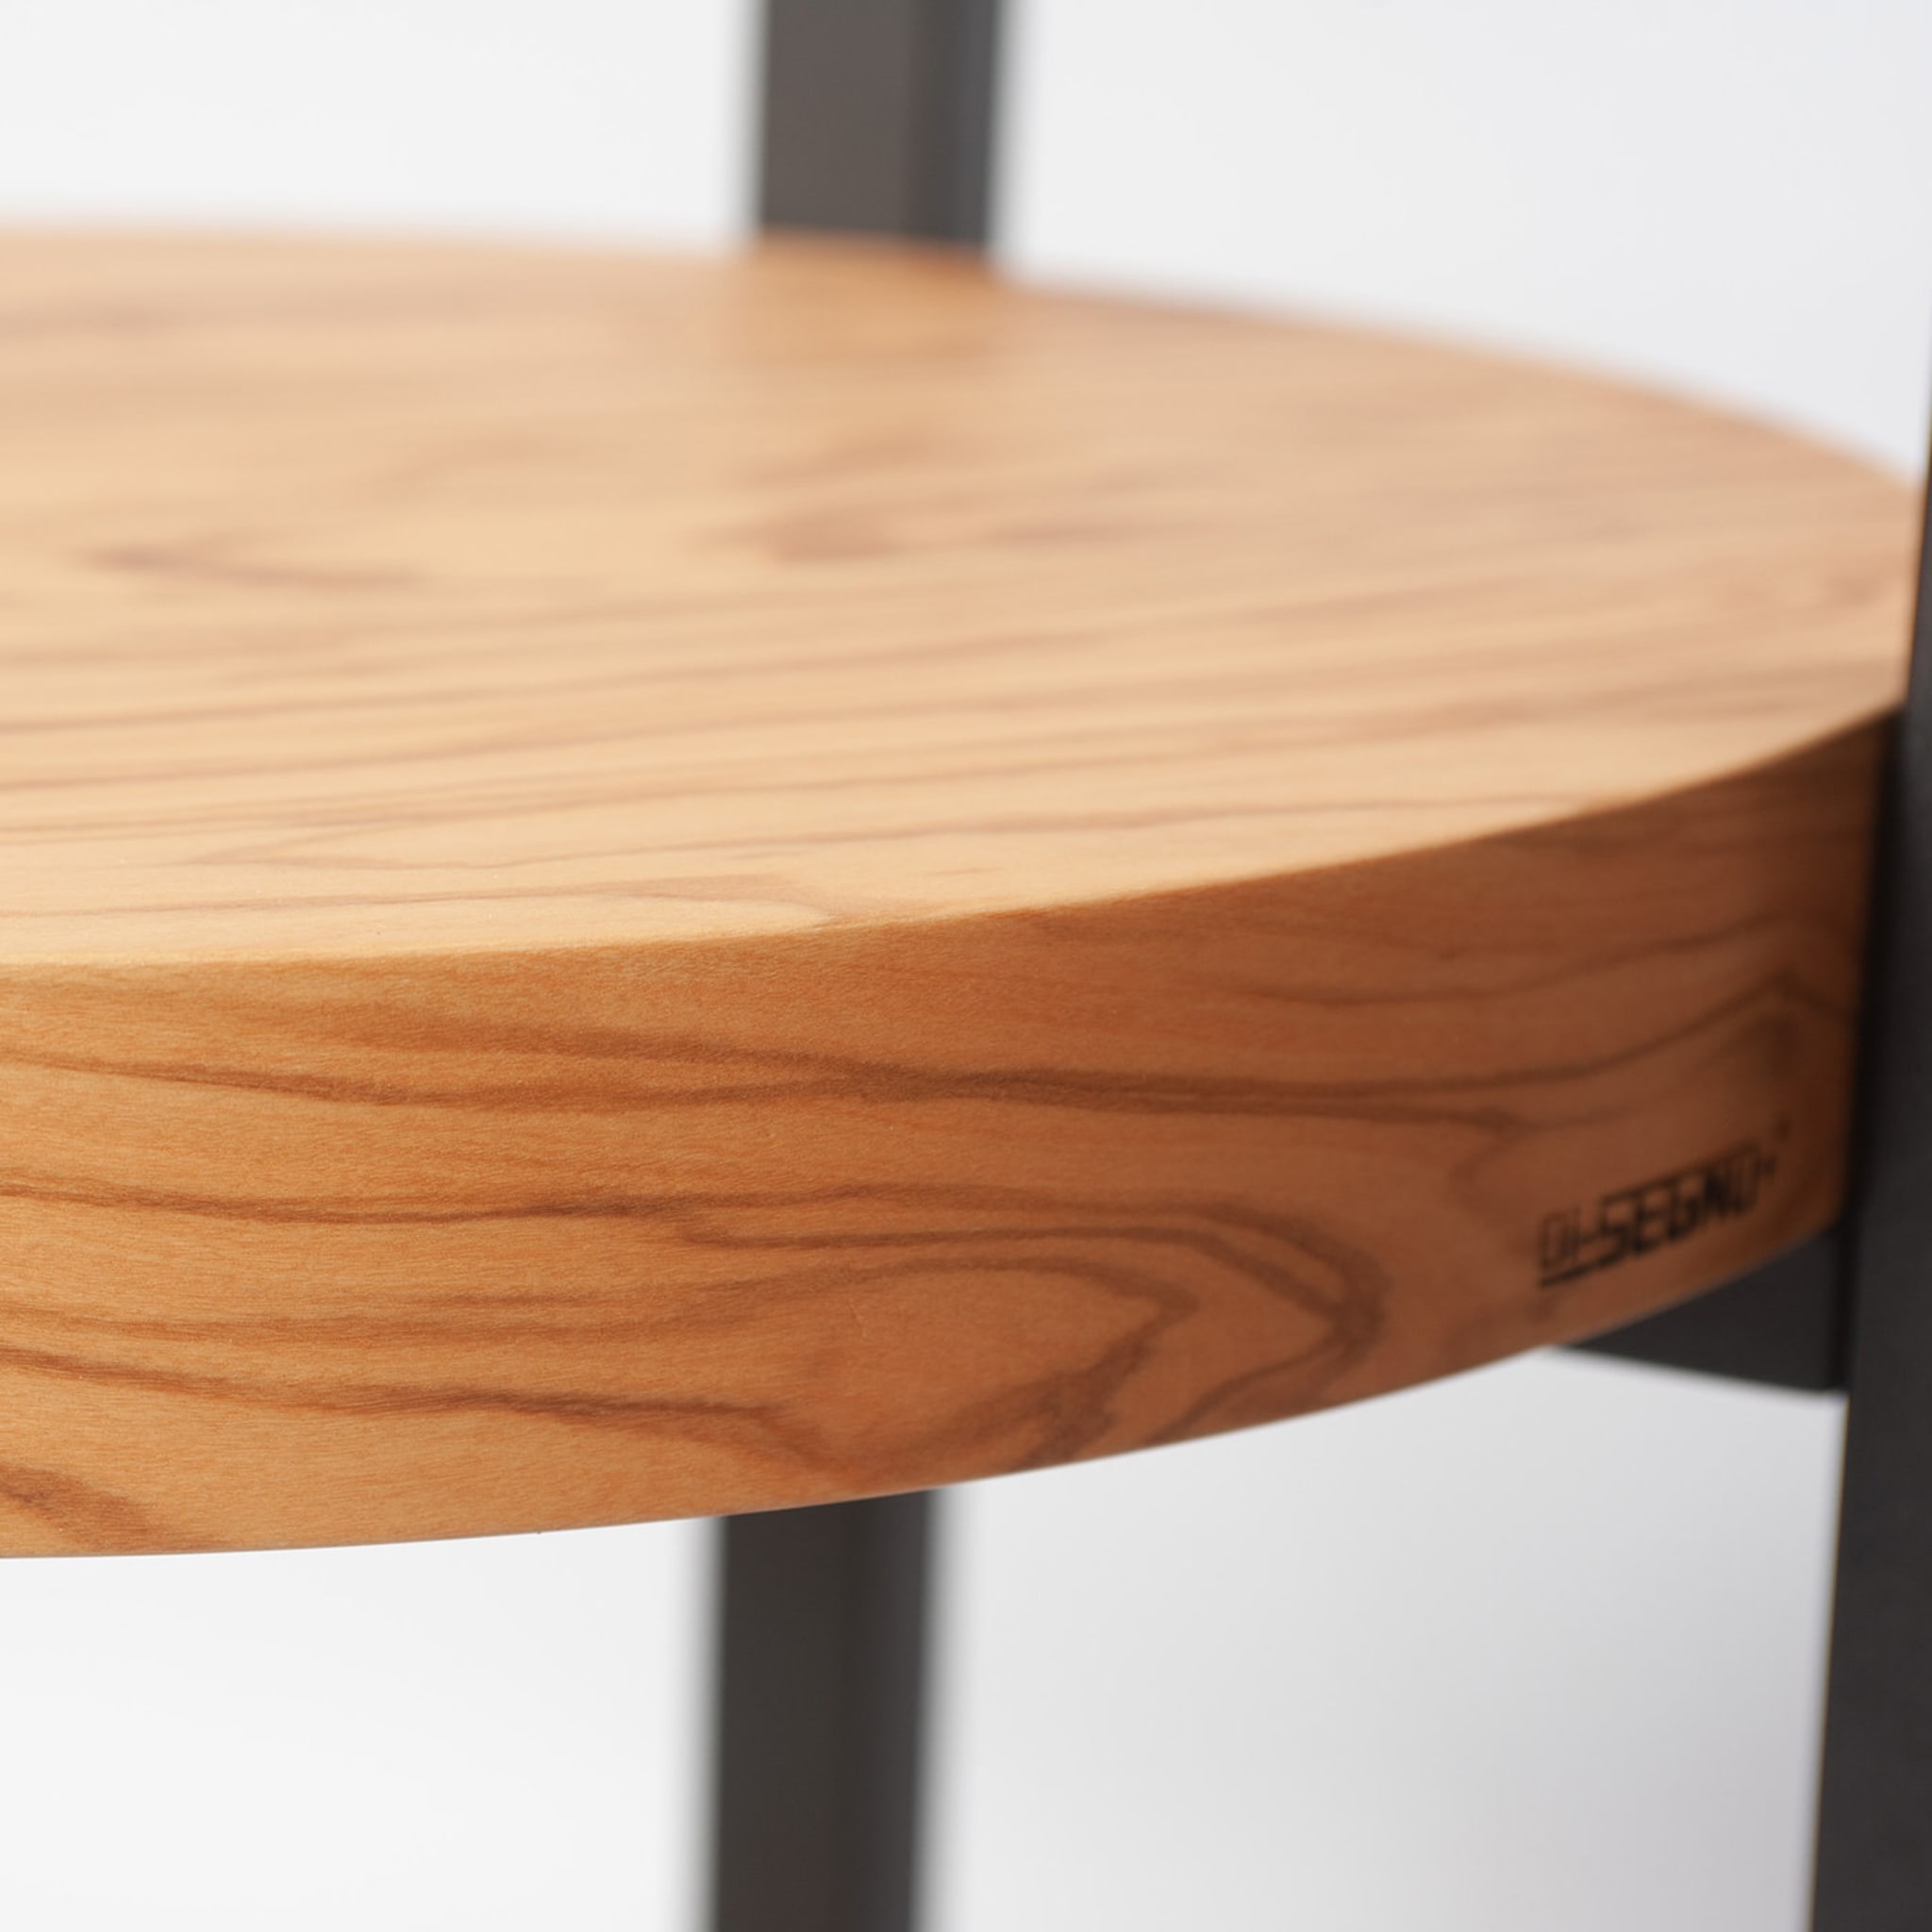 Vortice Olive-Wood Table by Spazio 4.0 - Alternative view 4